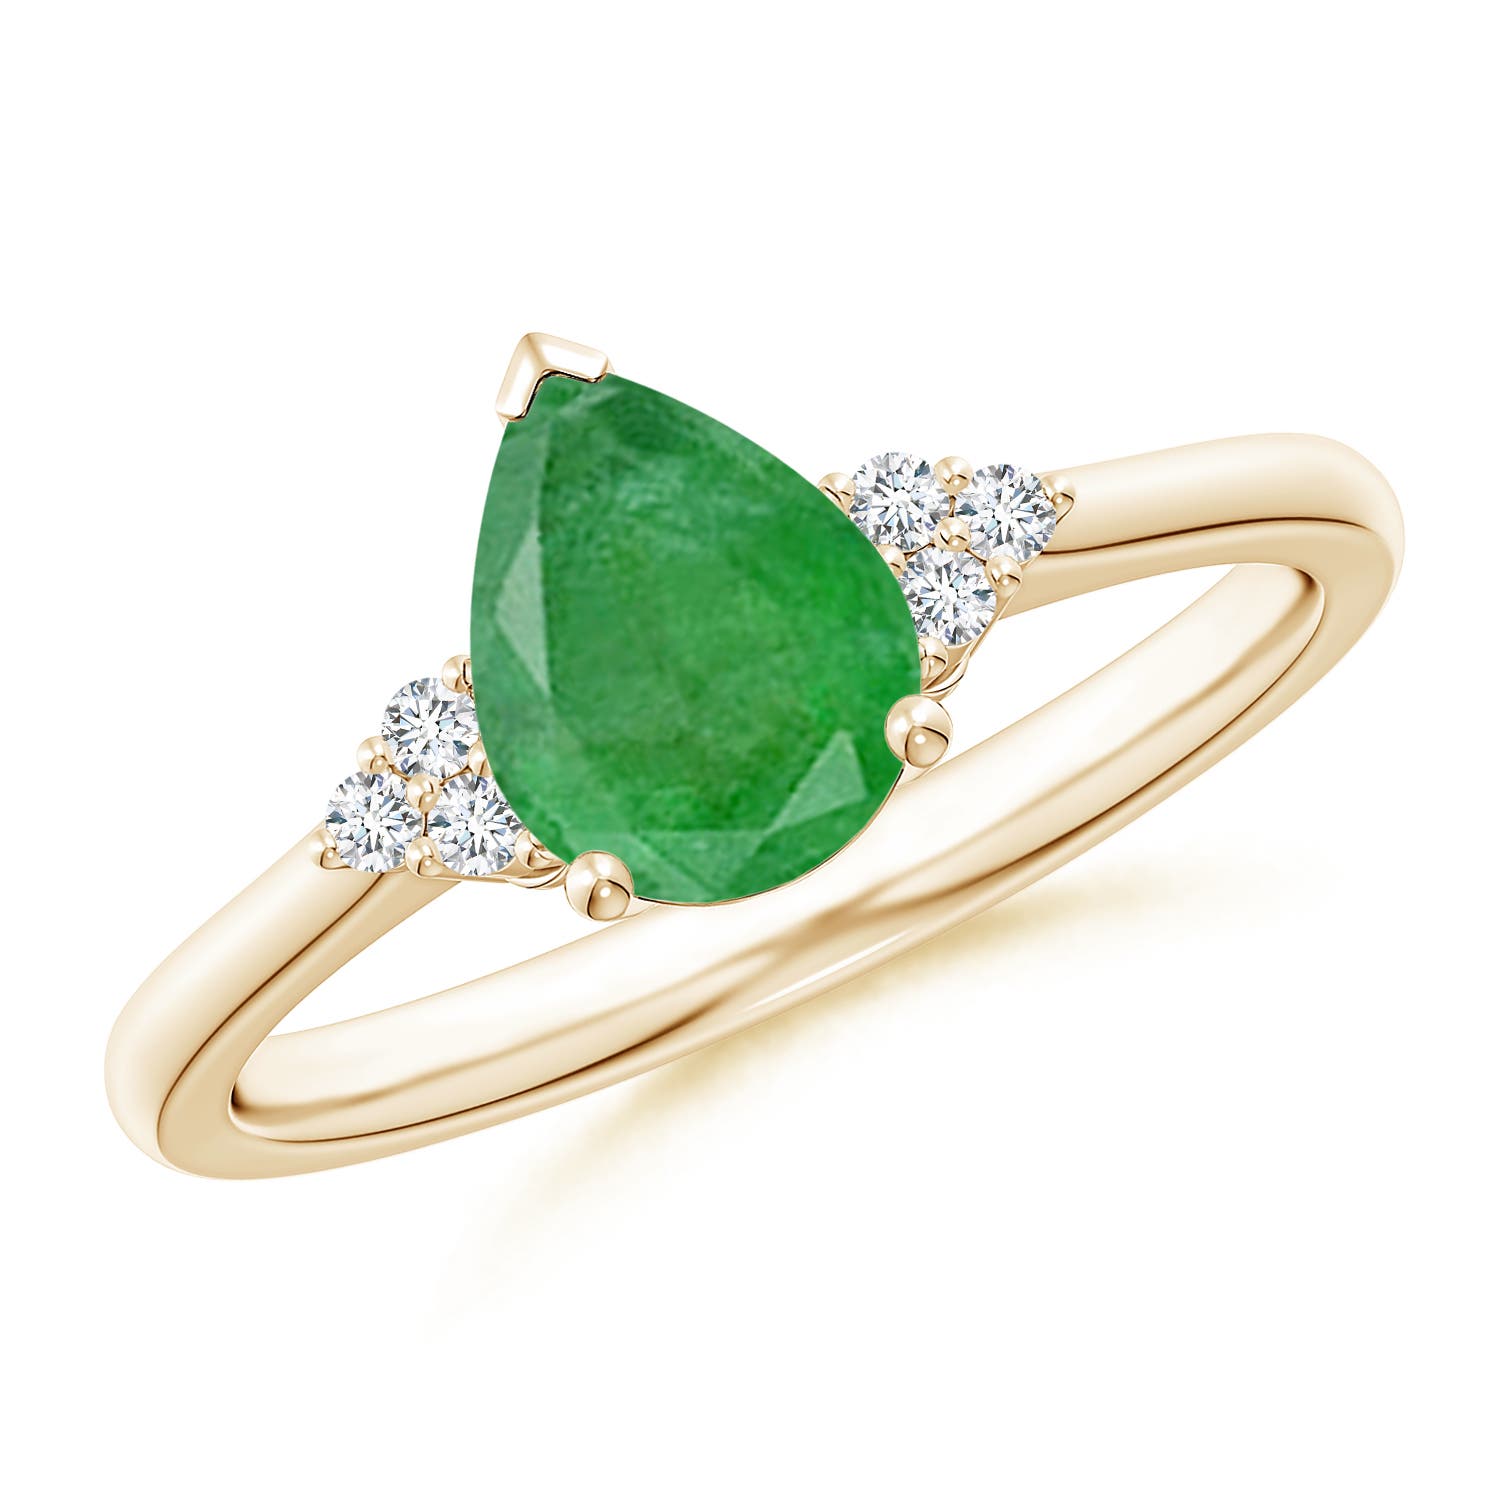 A - Emerald / 1.02 CT / 14 KT Yellow Gold